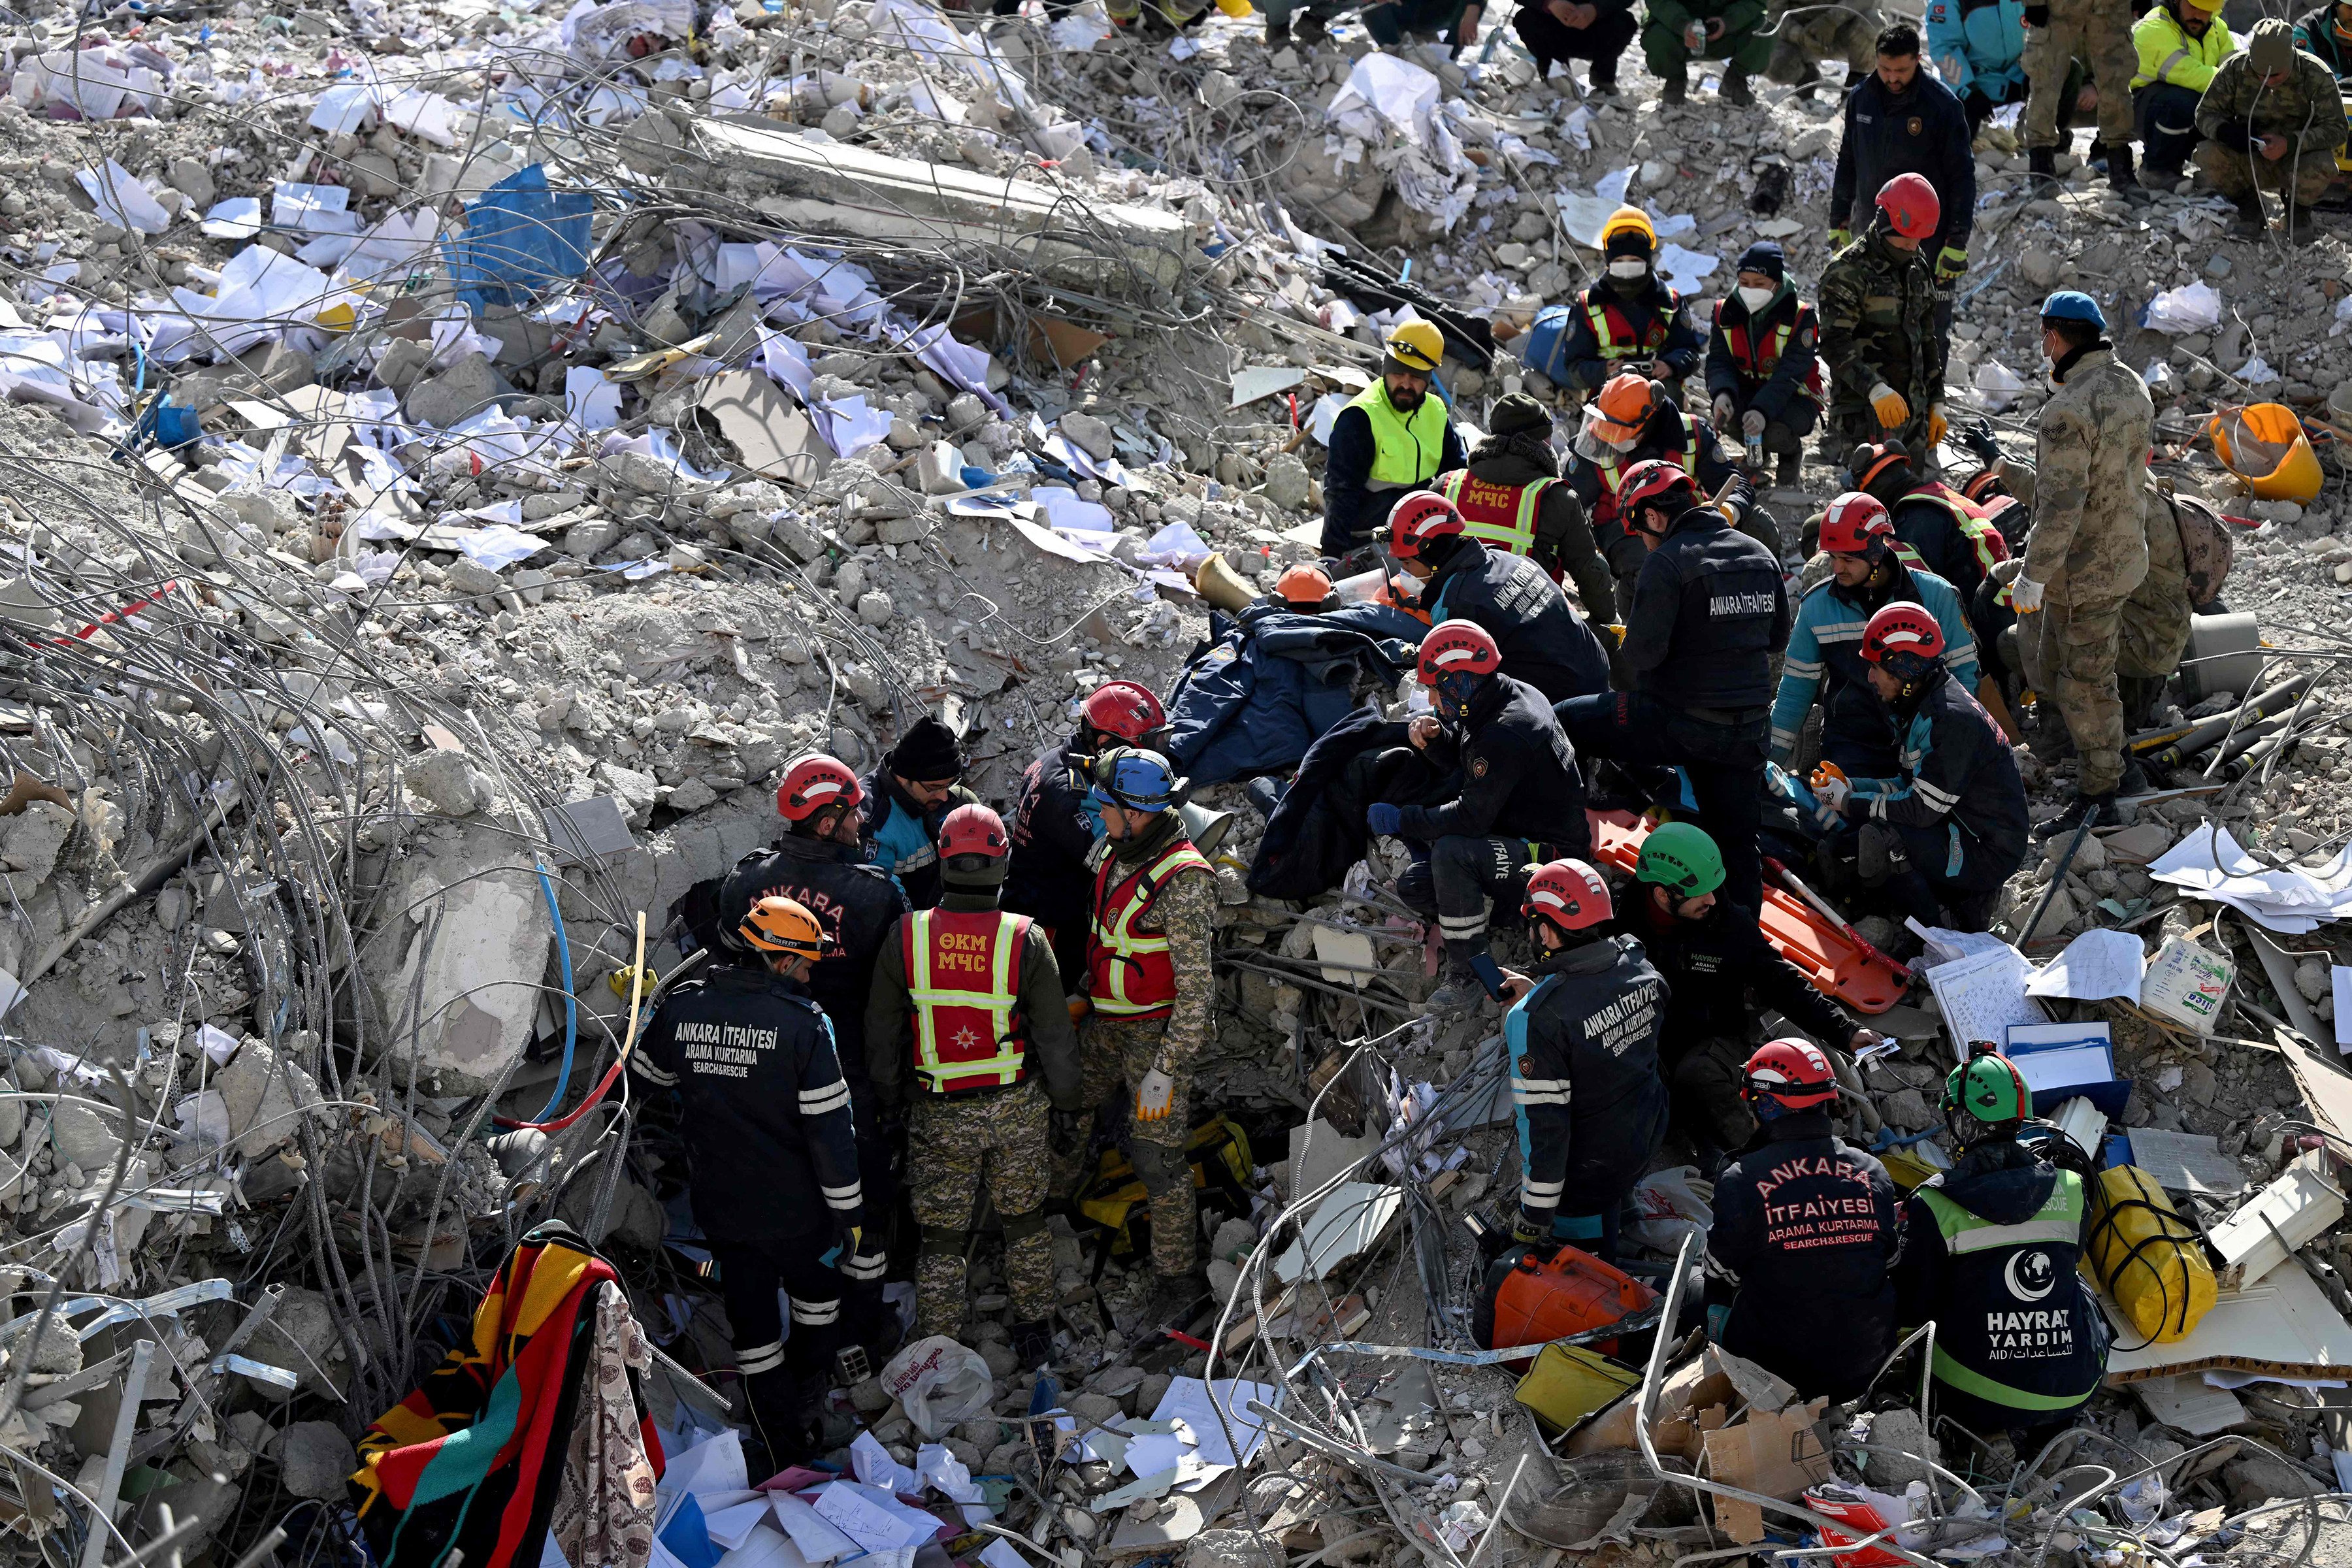 Ankara fire department and Kirgiz search and rescue teams search the rubble of collapsed buildings in Kahramanmaras on February 14, 2023, in the aftermath of the February 6 earthquake that killed over 40,000 people. Photo: AFP via Getty Images